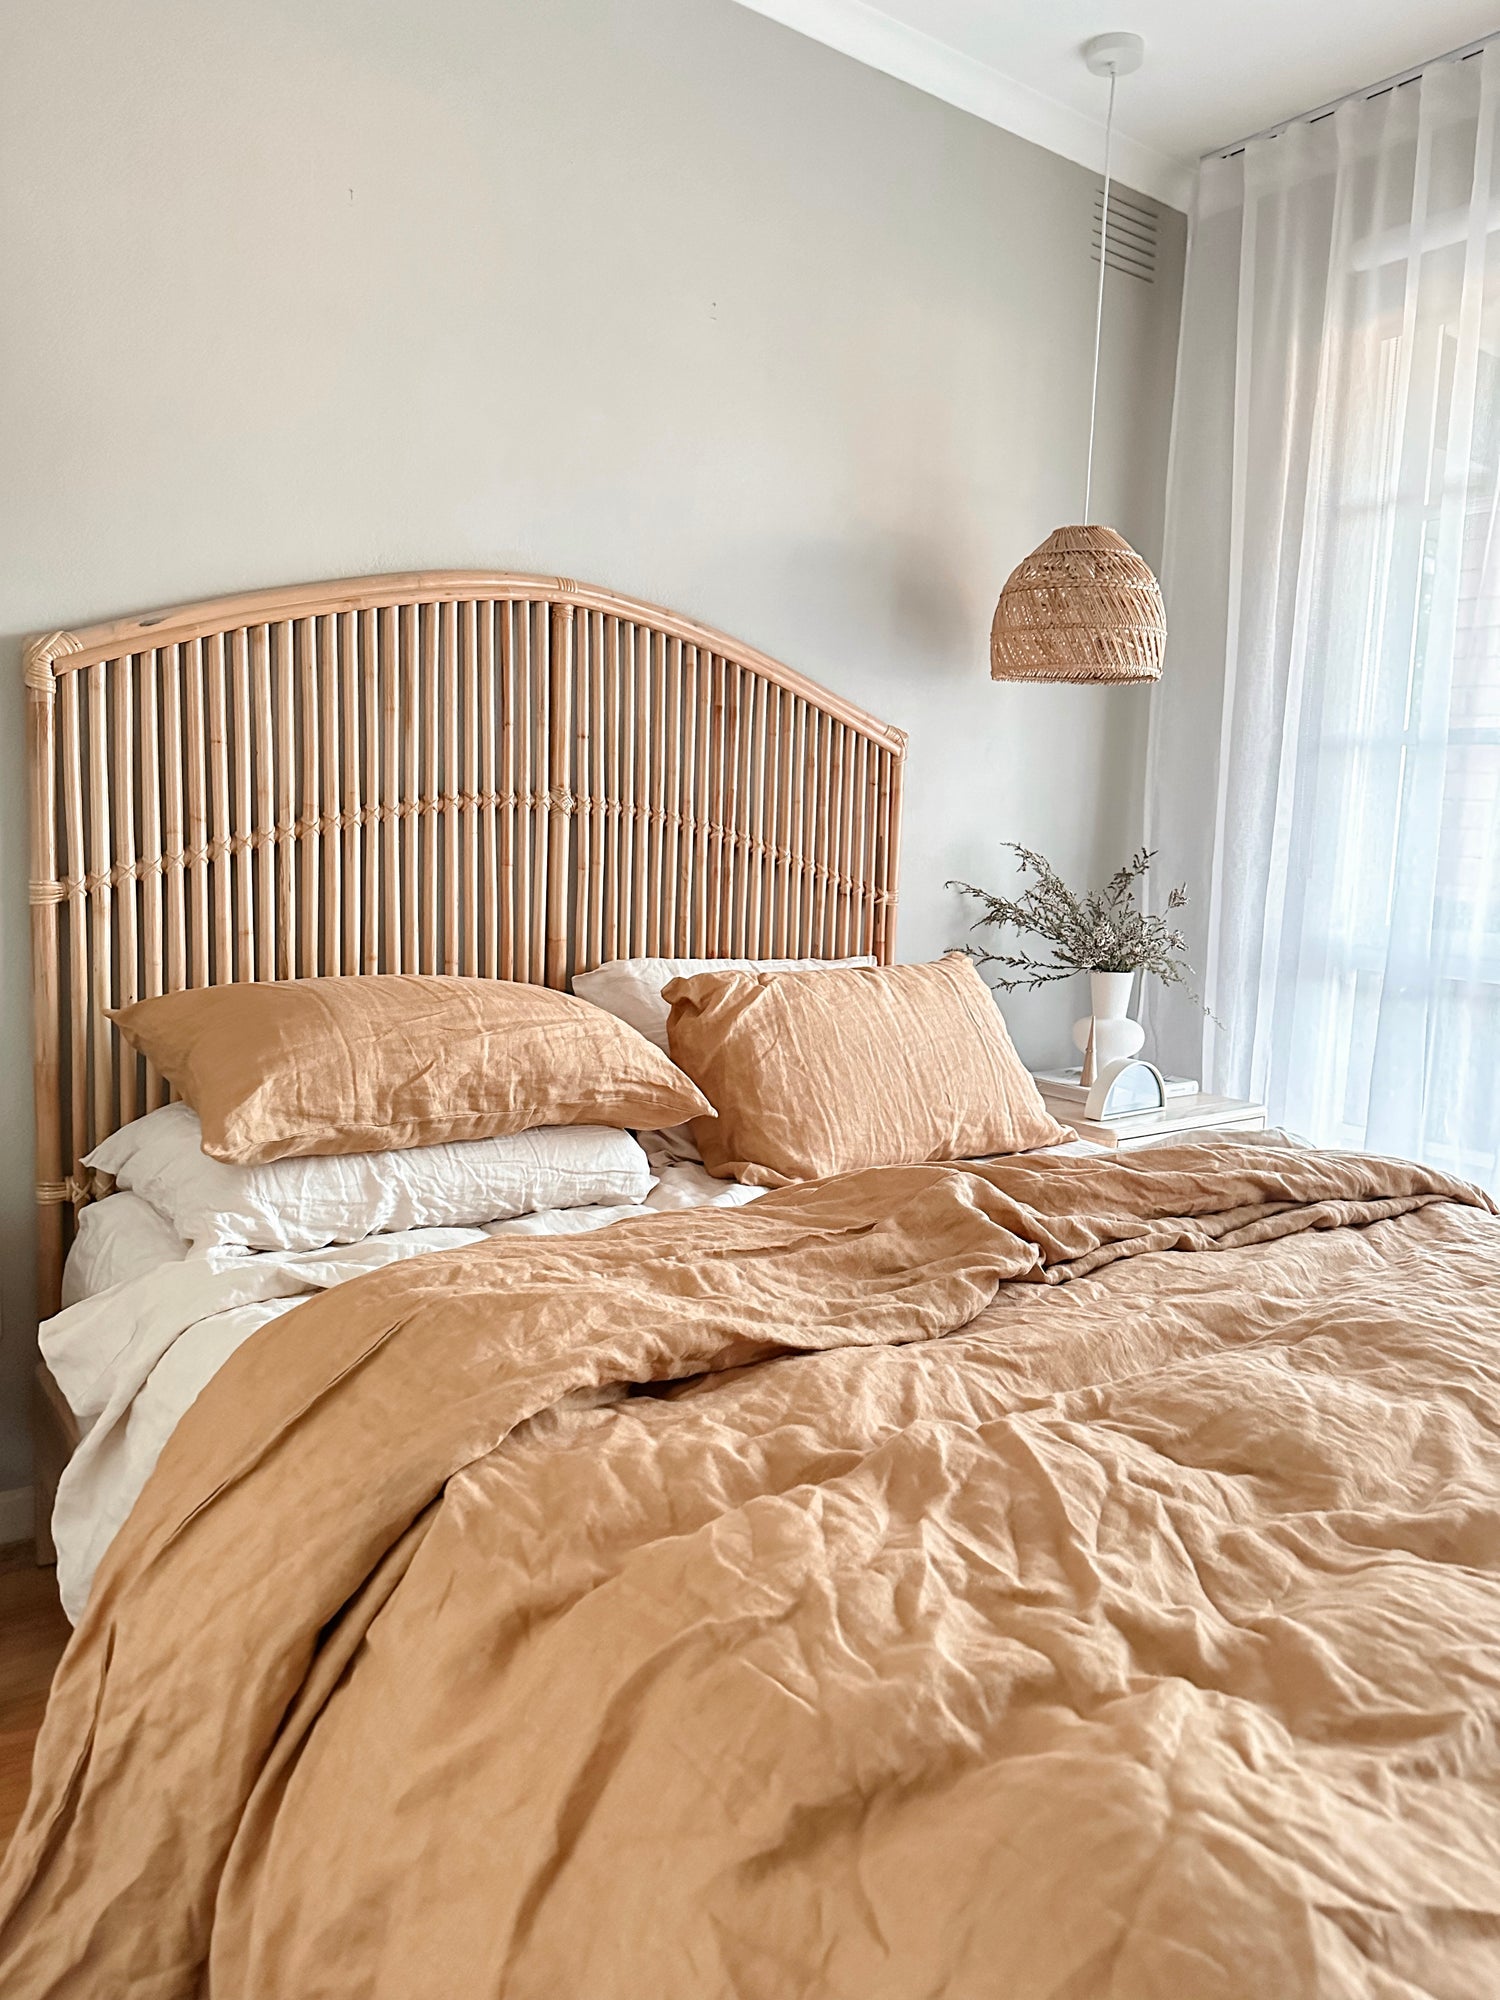 Discover OEKO-TEX Certified Pinstripe Linen Fitted Sheets at Bistara Linen. Pinstripe Linen Fitted Sheets is available in King and Queen sizes with free shipping in Australia.